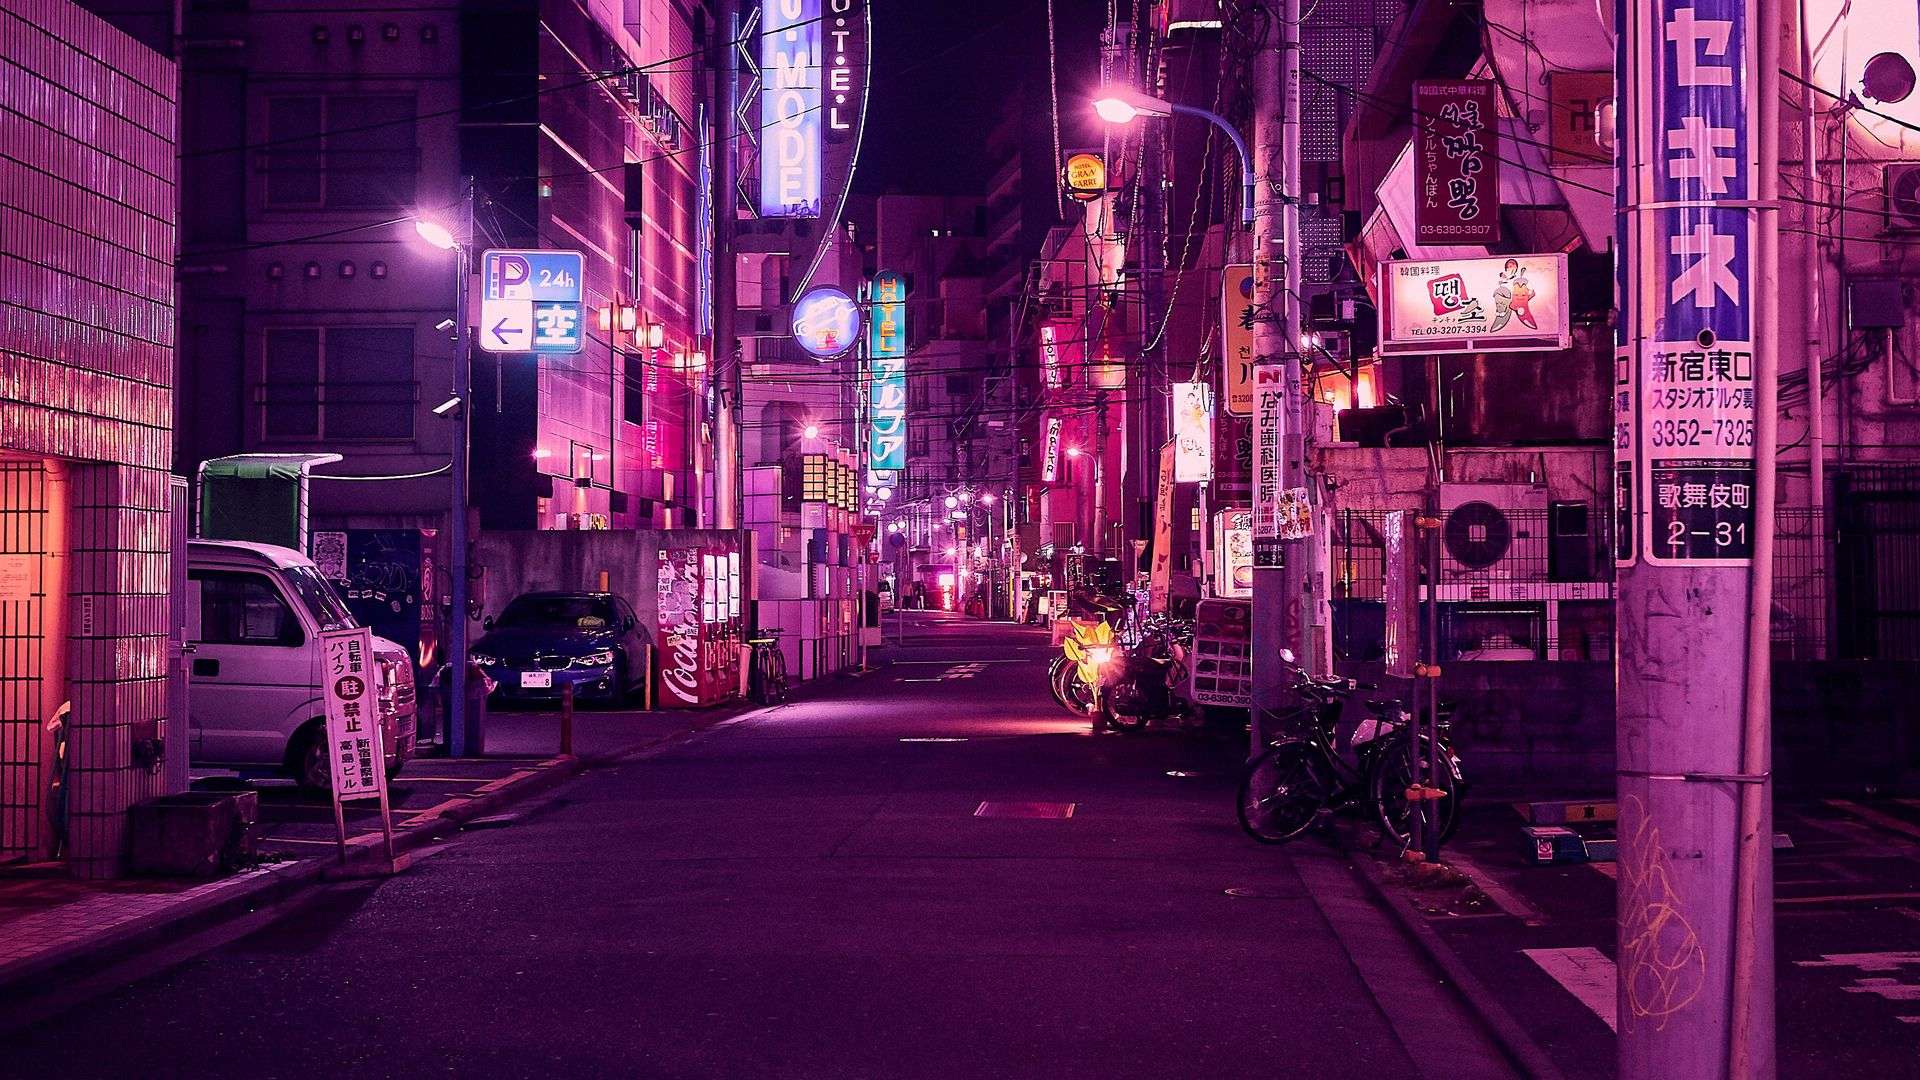 Pink Neon City Wallpapers - Top Free Pink Neon City Backgrounds